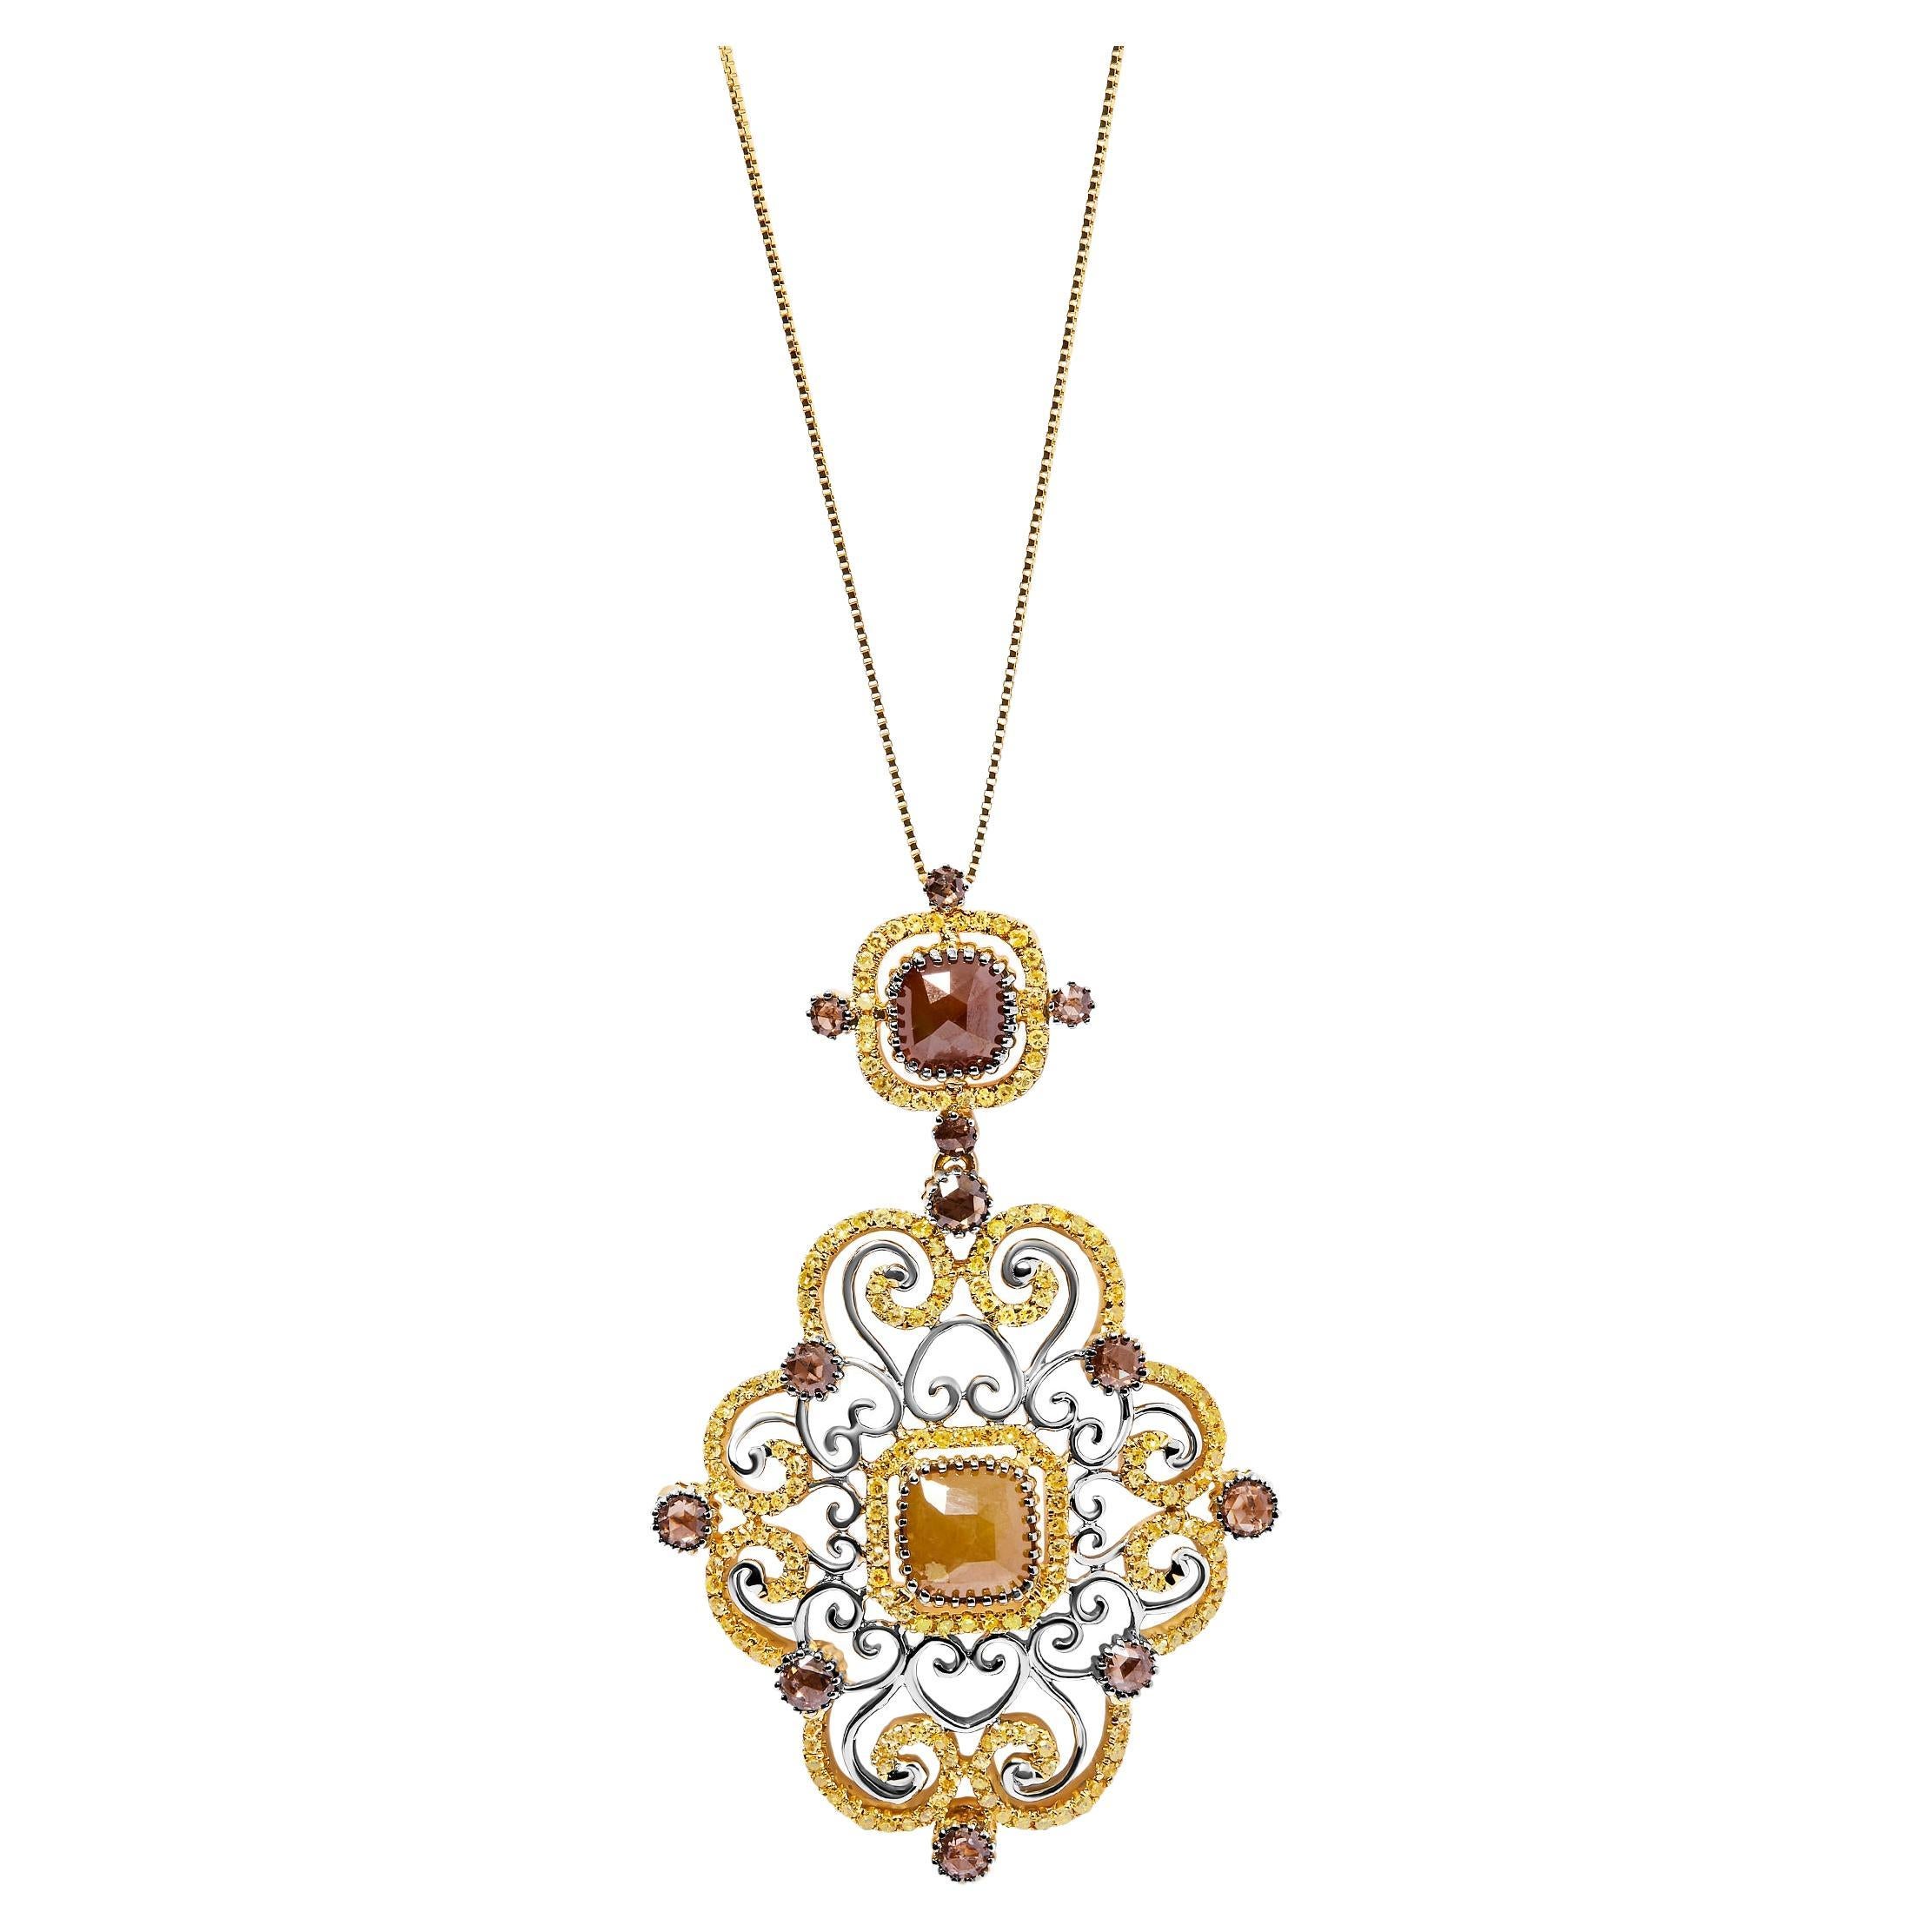 14K White and Yellow Gold 4.0 Carat Diamond Antique Style Pendant Necklace